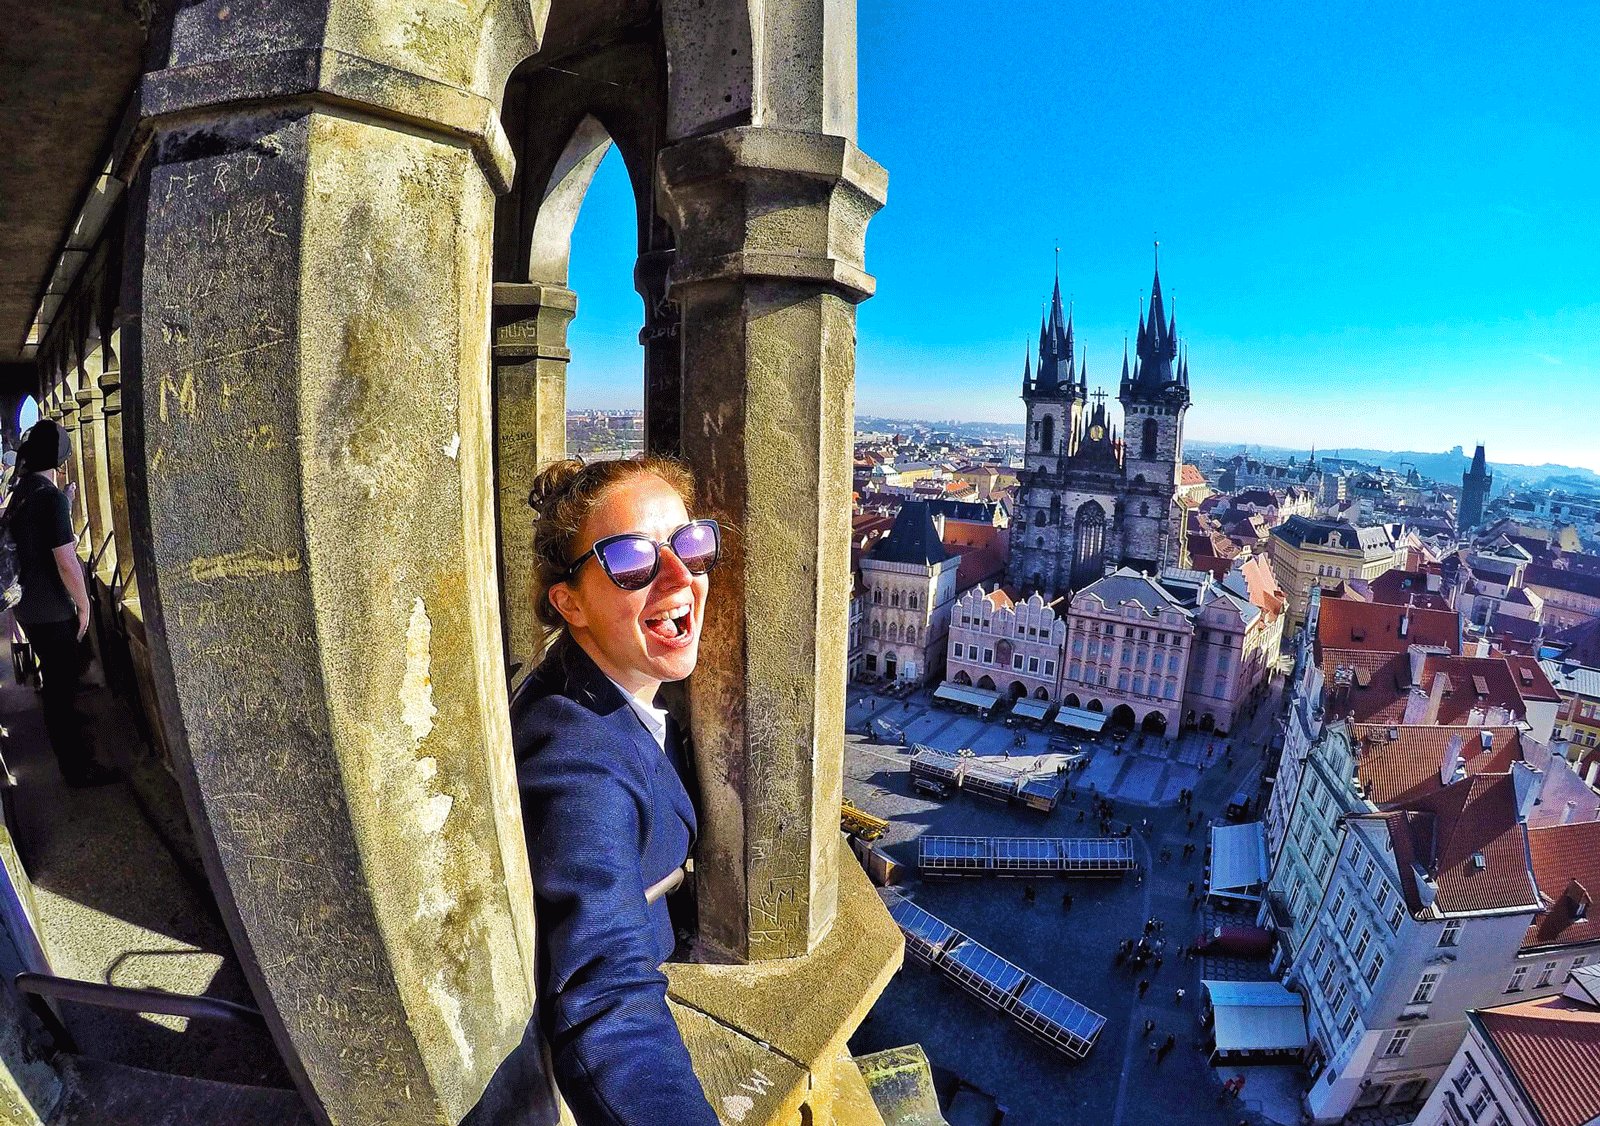 How to go up to the Old Town Hall tower in Prague